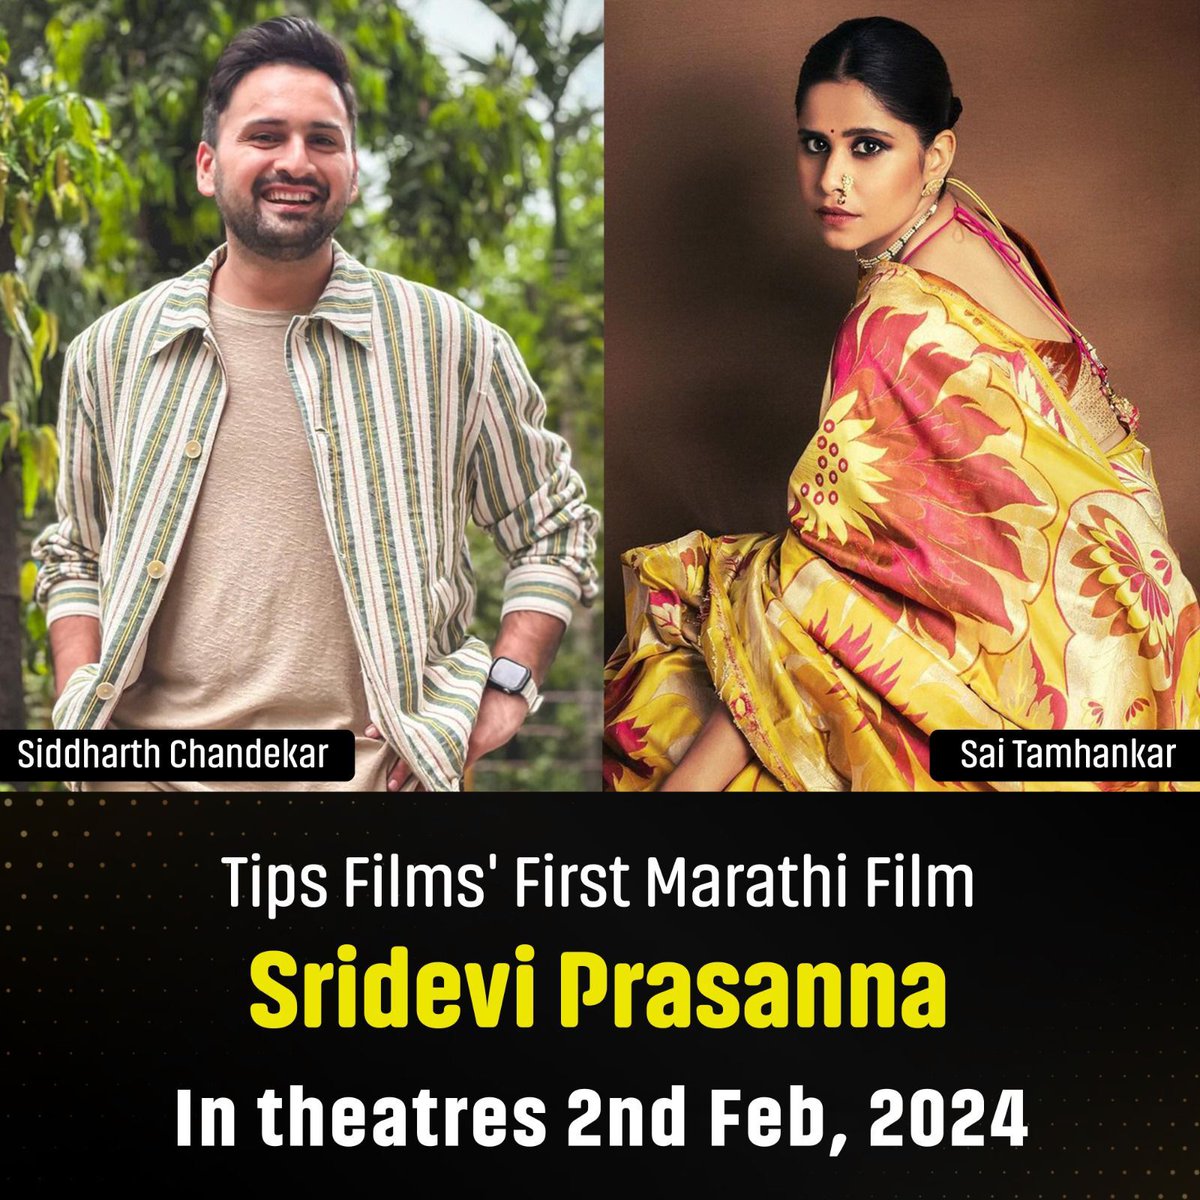 #TipsFilms Ltd.’s 1st #Marathi Film #SrideviPrasanna is set to release on February 2nd, 2024.. Initially scheduled for January 5, 2024.. Stars #SaiTamhankar & #SiddharthChandekar... Directed by Vishal Modhave and written by Aditi Moghe.